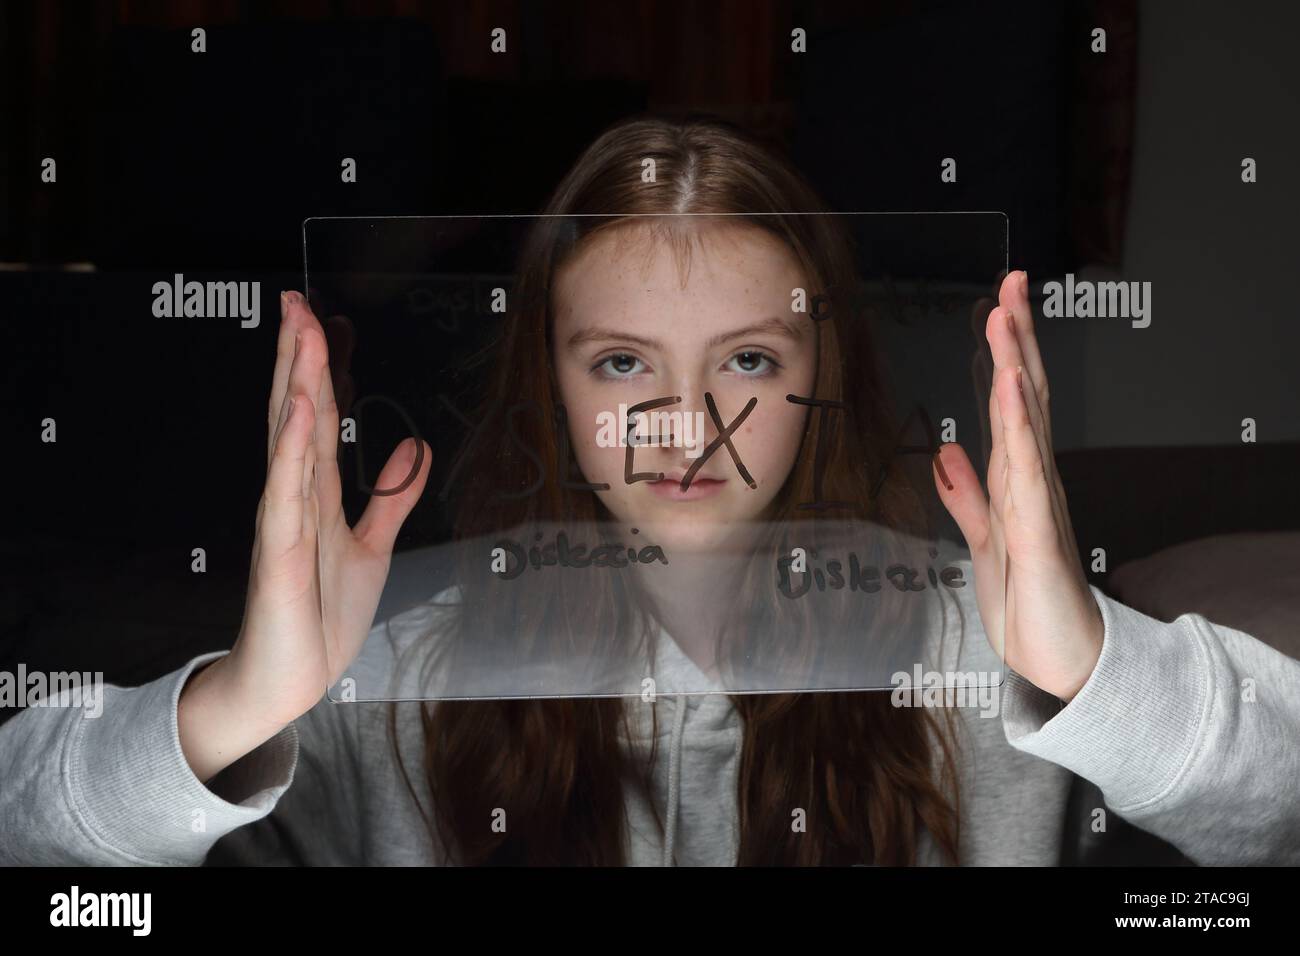 Teenage girl holds transparent plastic board with words related to dyslexia in front of her face, including misspellings Stock Photo